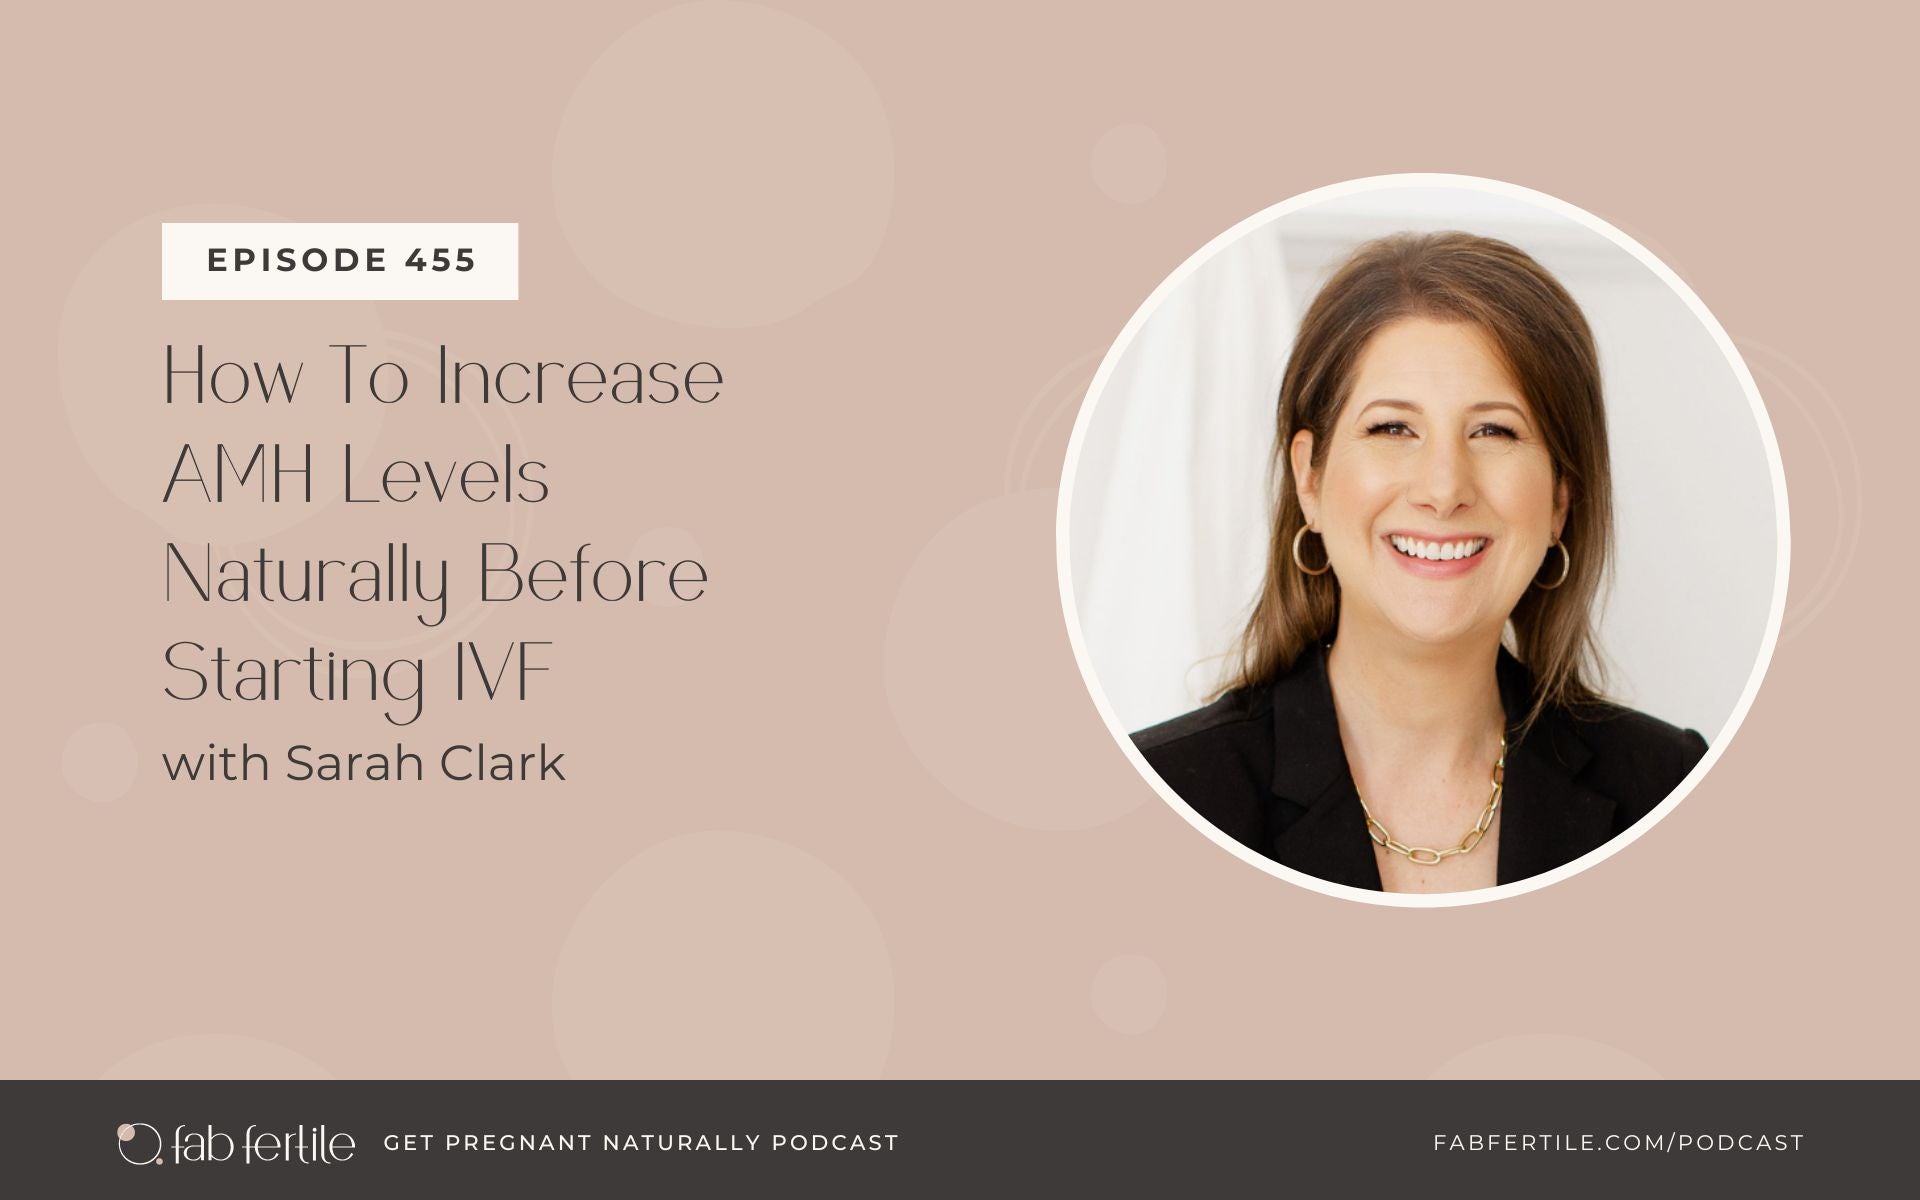 How To Increase AMH Levels Naturally Before Starting IVF